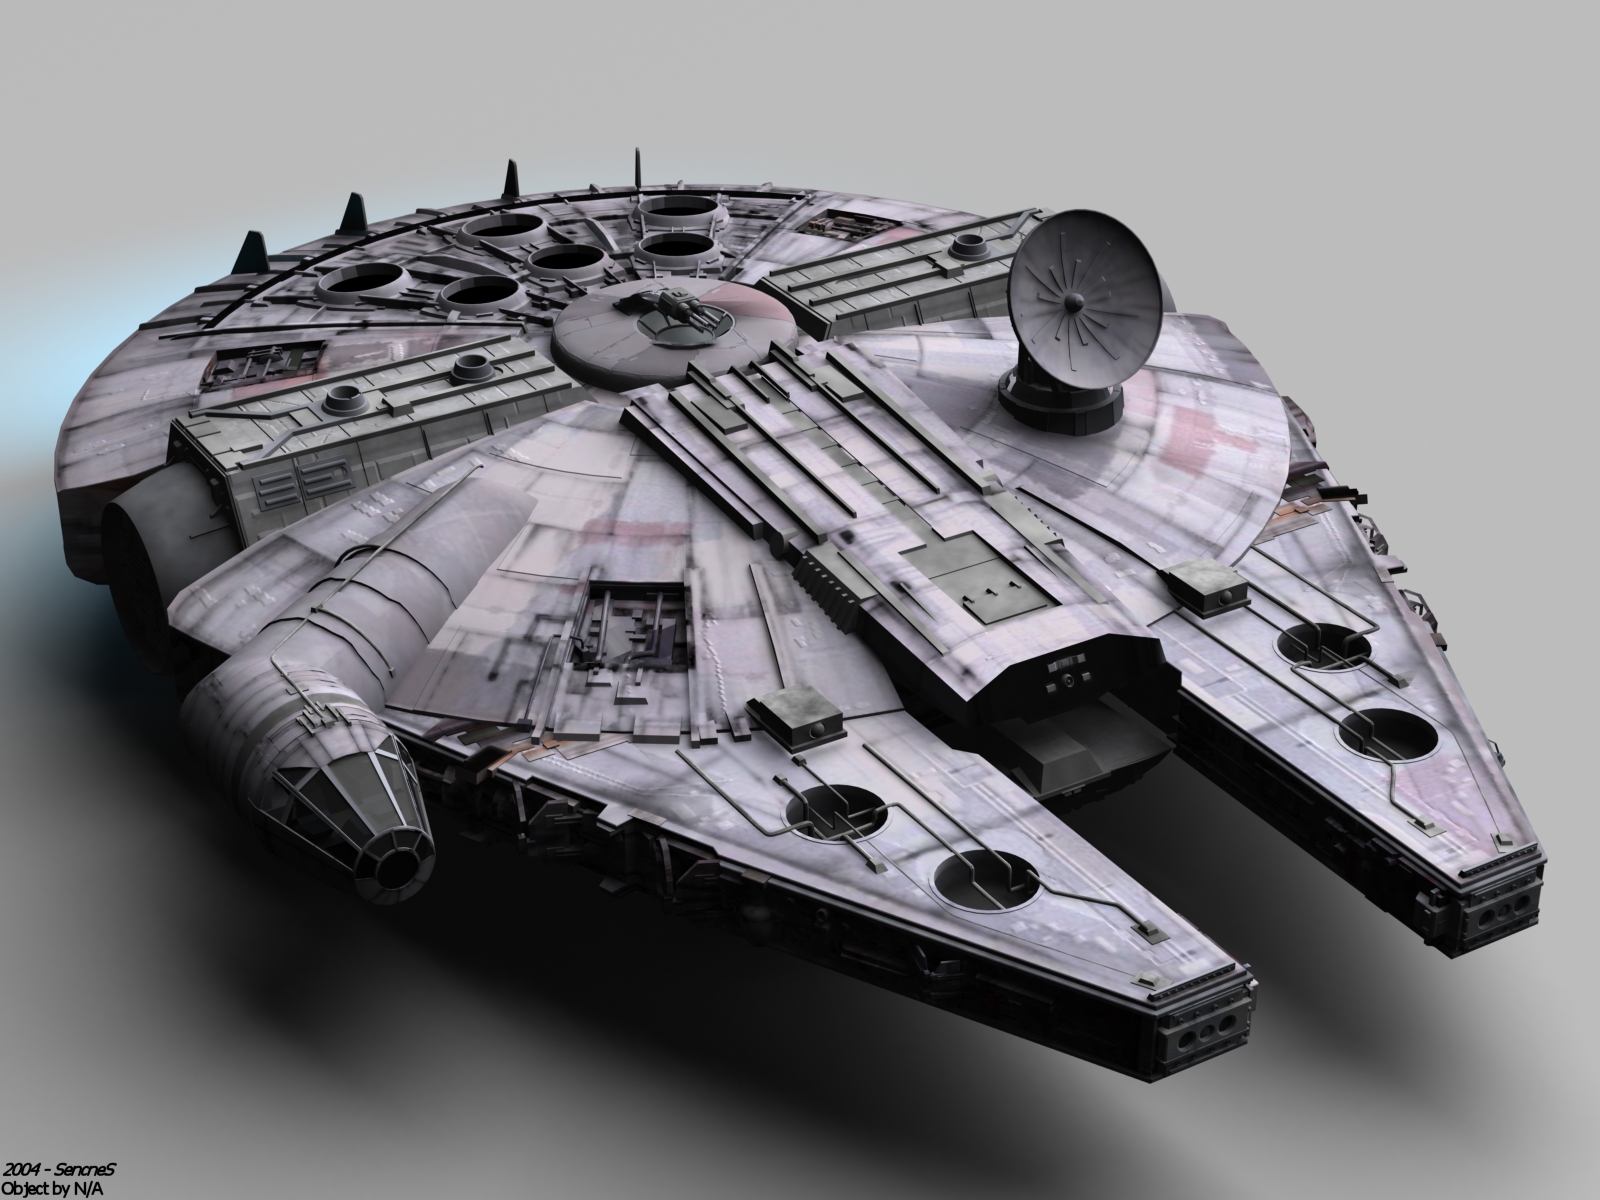 Wars Movies Spaceships Millenium Falcon HD Wallpaper Of 3d Graphic